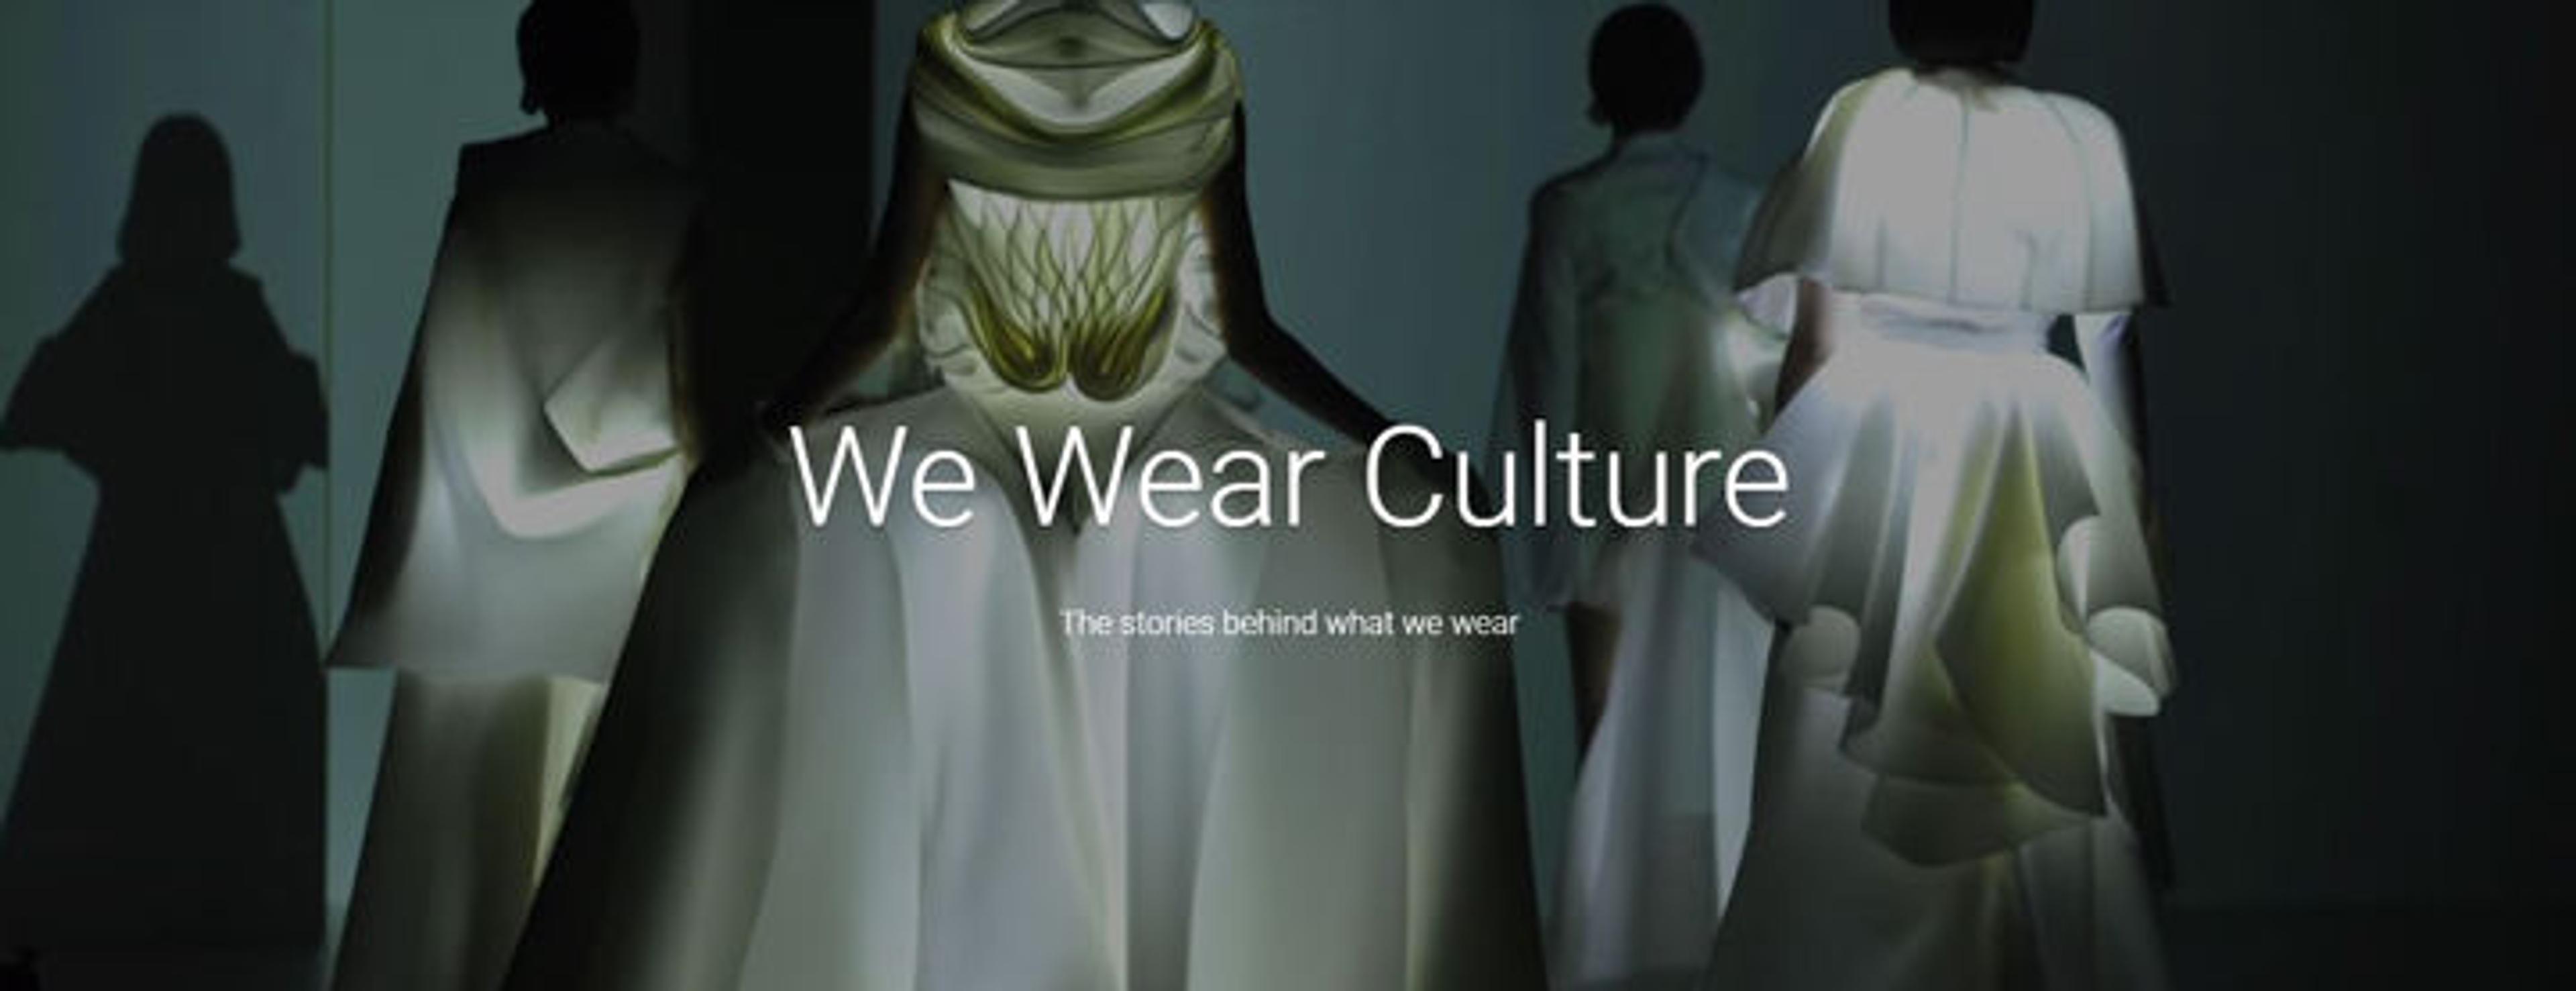 We Wear Culture | Mysterious image of several modern gowns